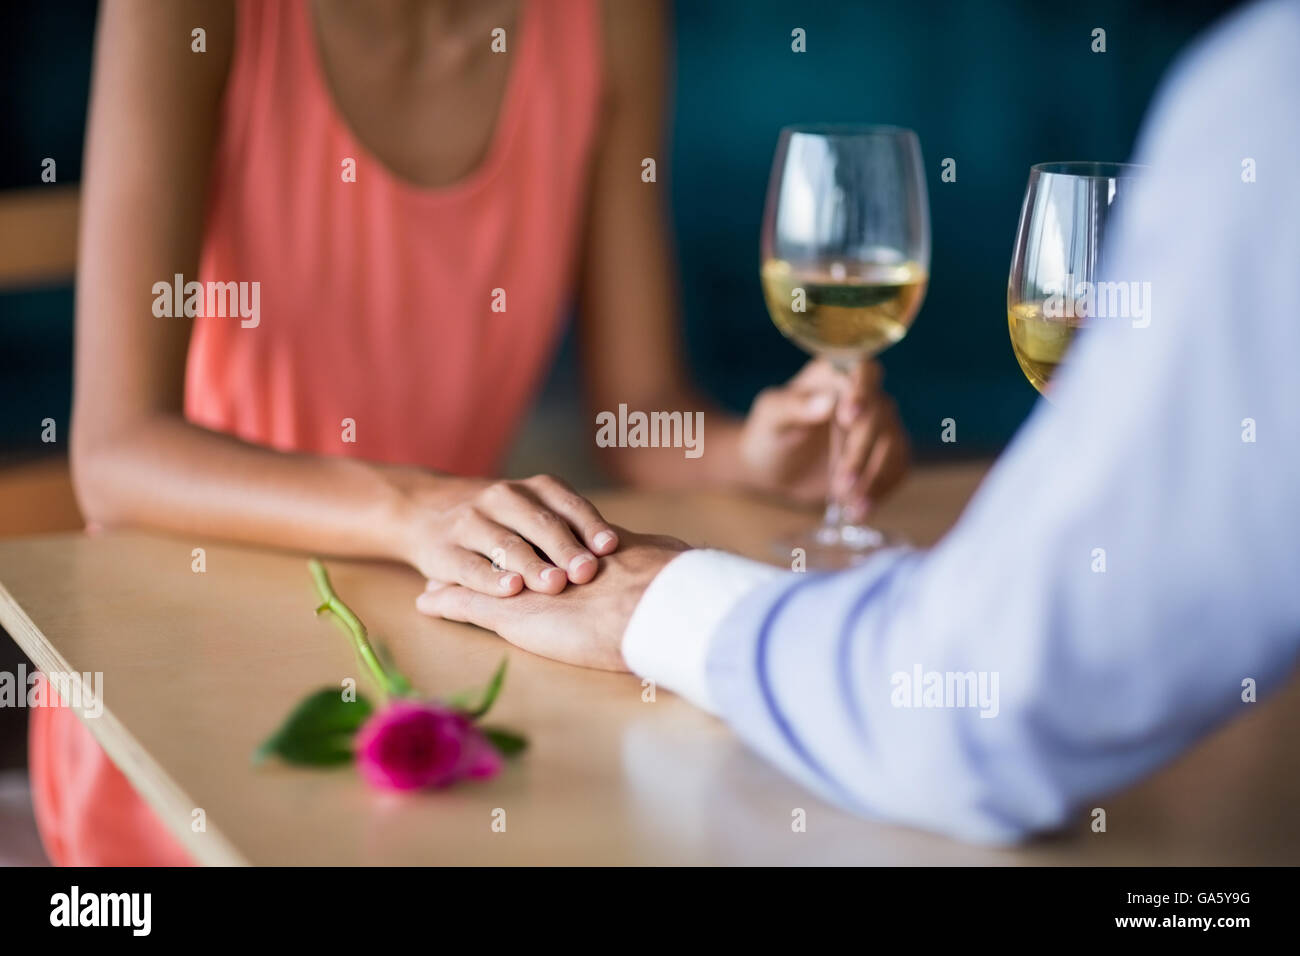 Mid section of couple holding hands while having glass of wine Stock Photo